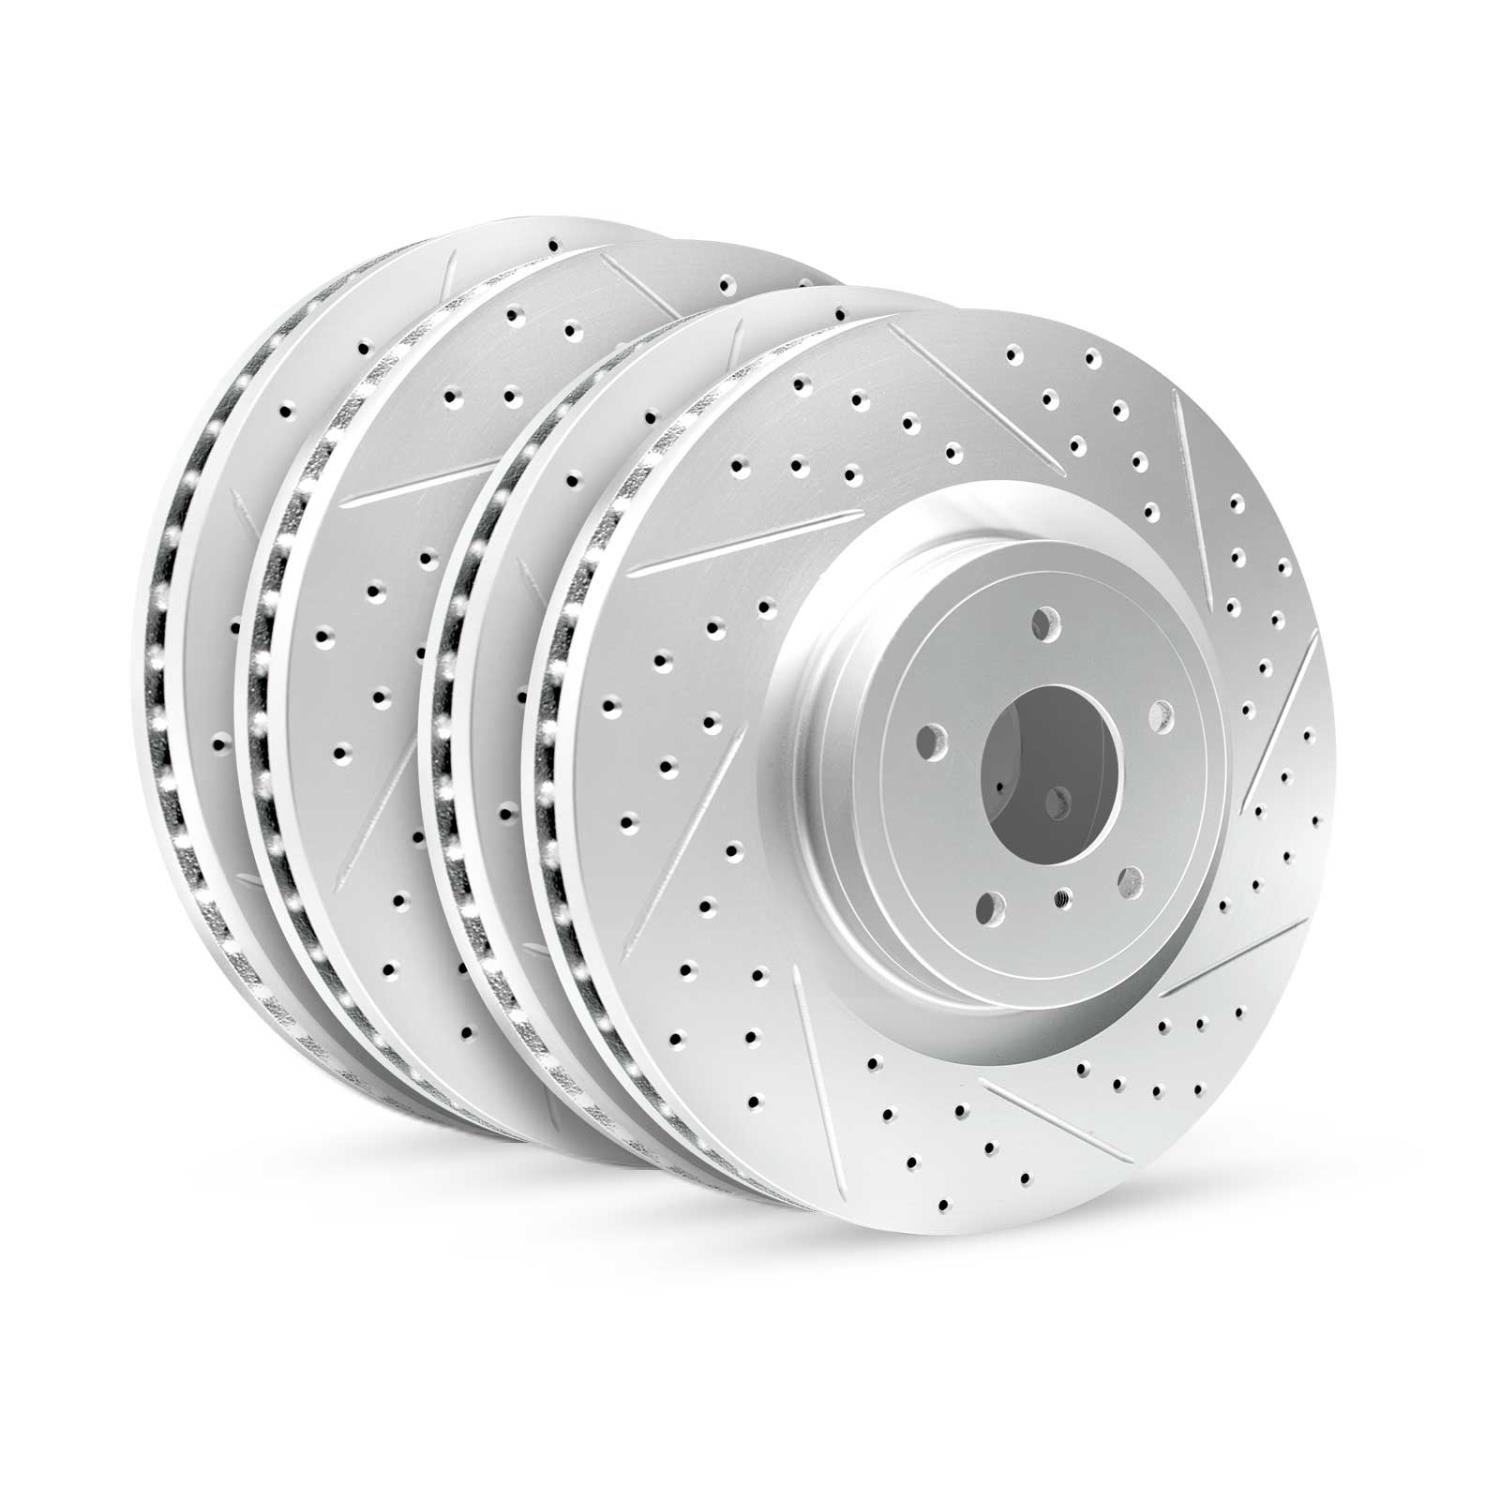 GEO-Carbon Drilled/Slotted Rotors, 2004-2006 BMW, Position: Front/Rear